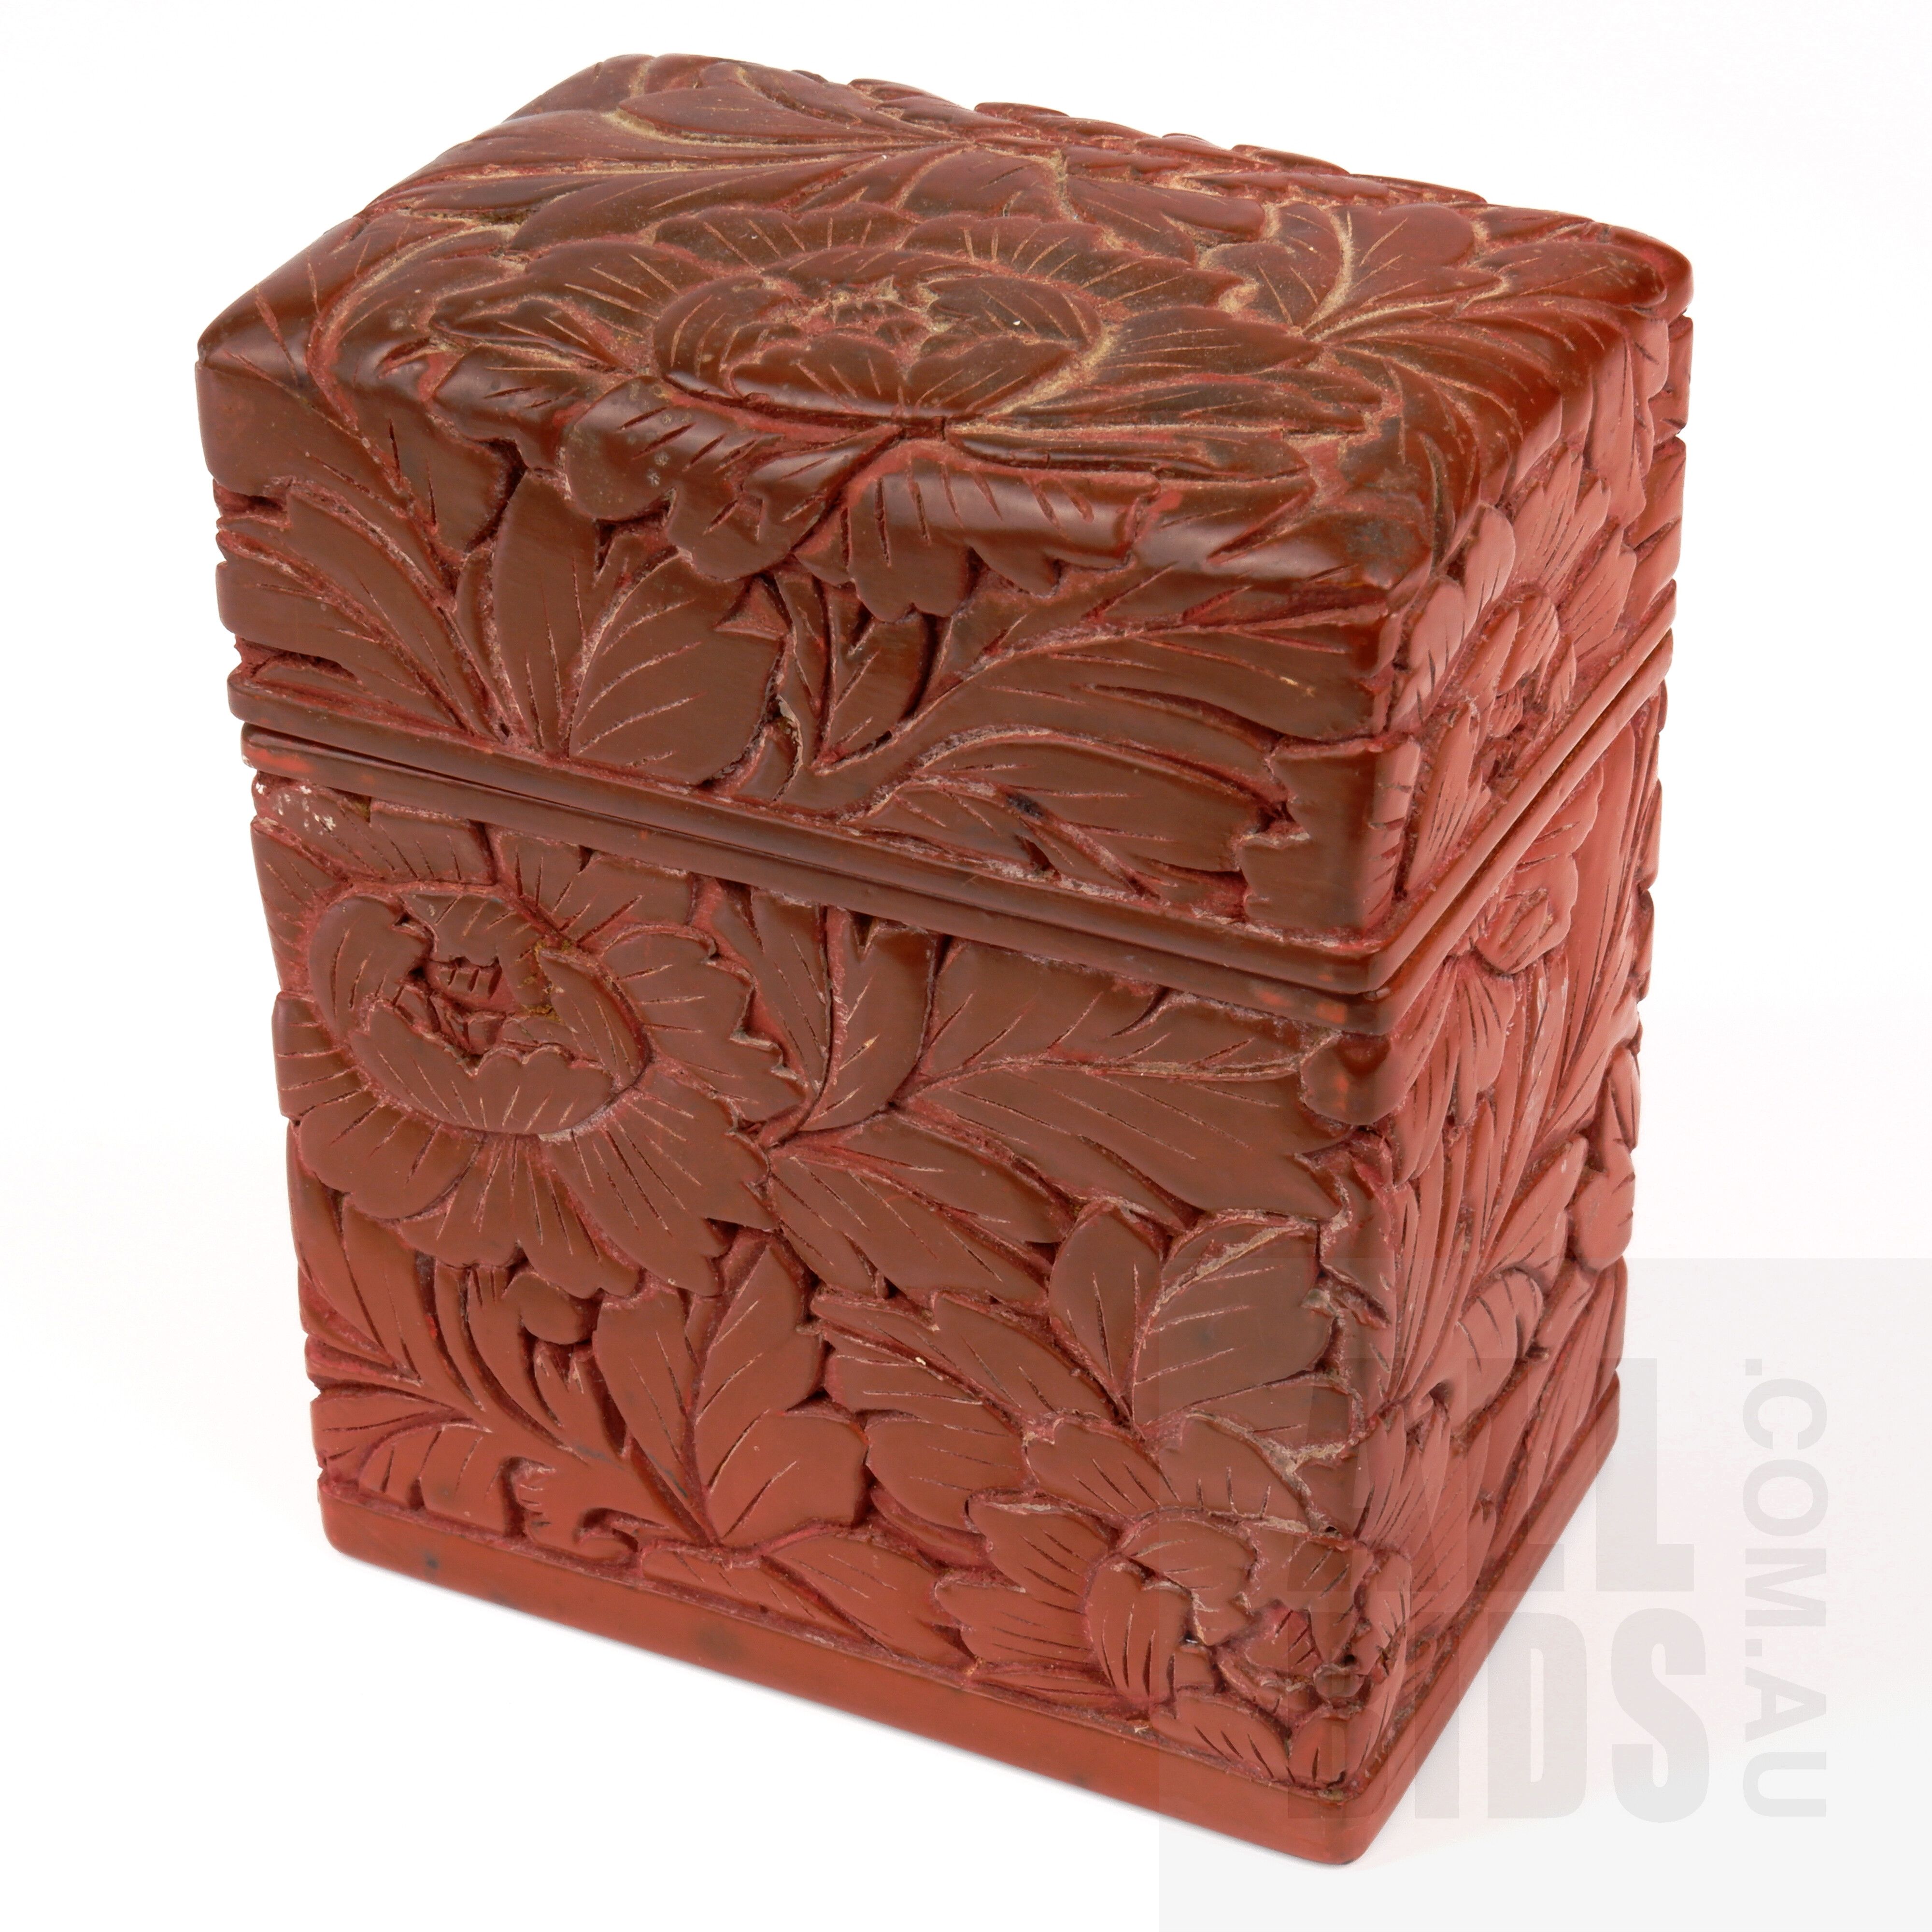 'Japanese Export Cinnabar Lacquer Playing Card Box, Early 20th Century'